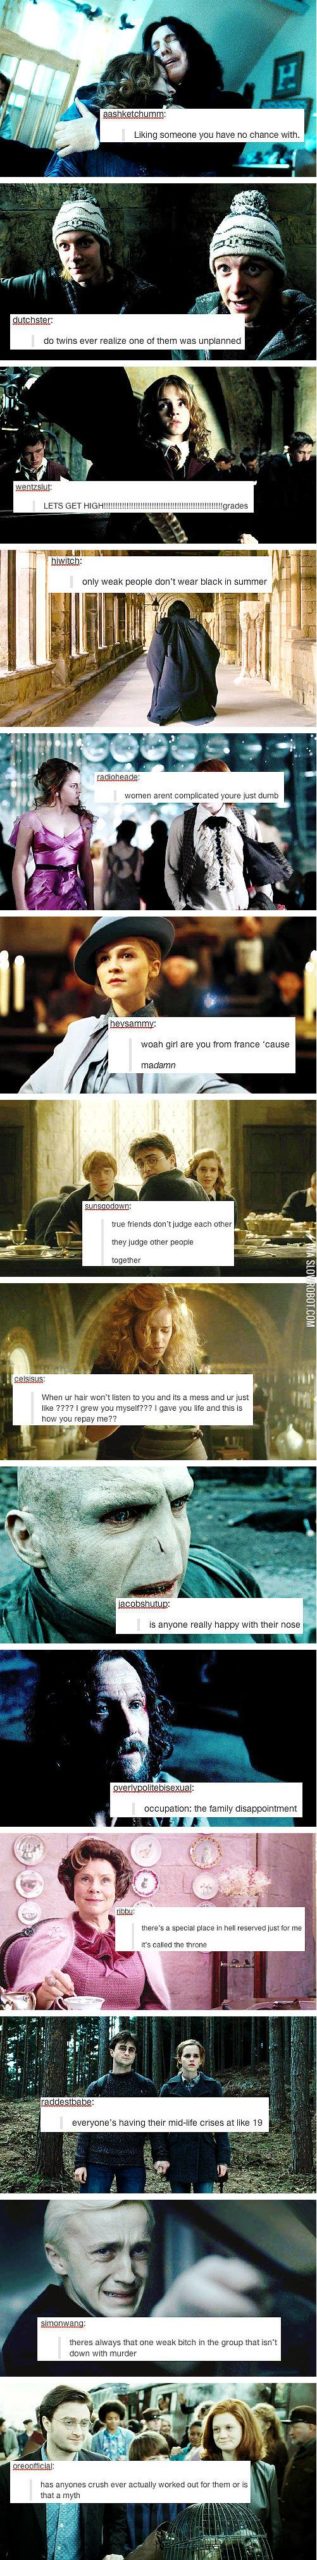 Harry+Potter%3A+Tumblr+edition.